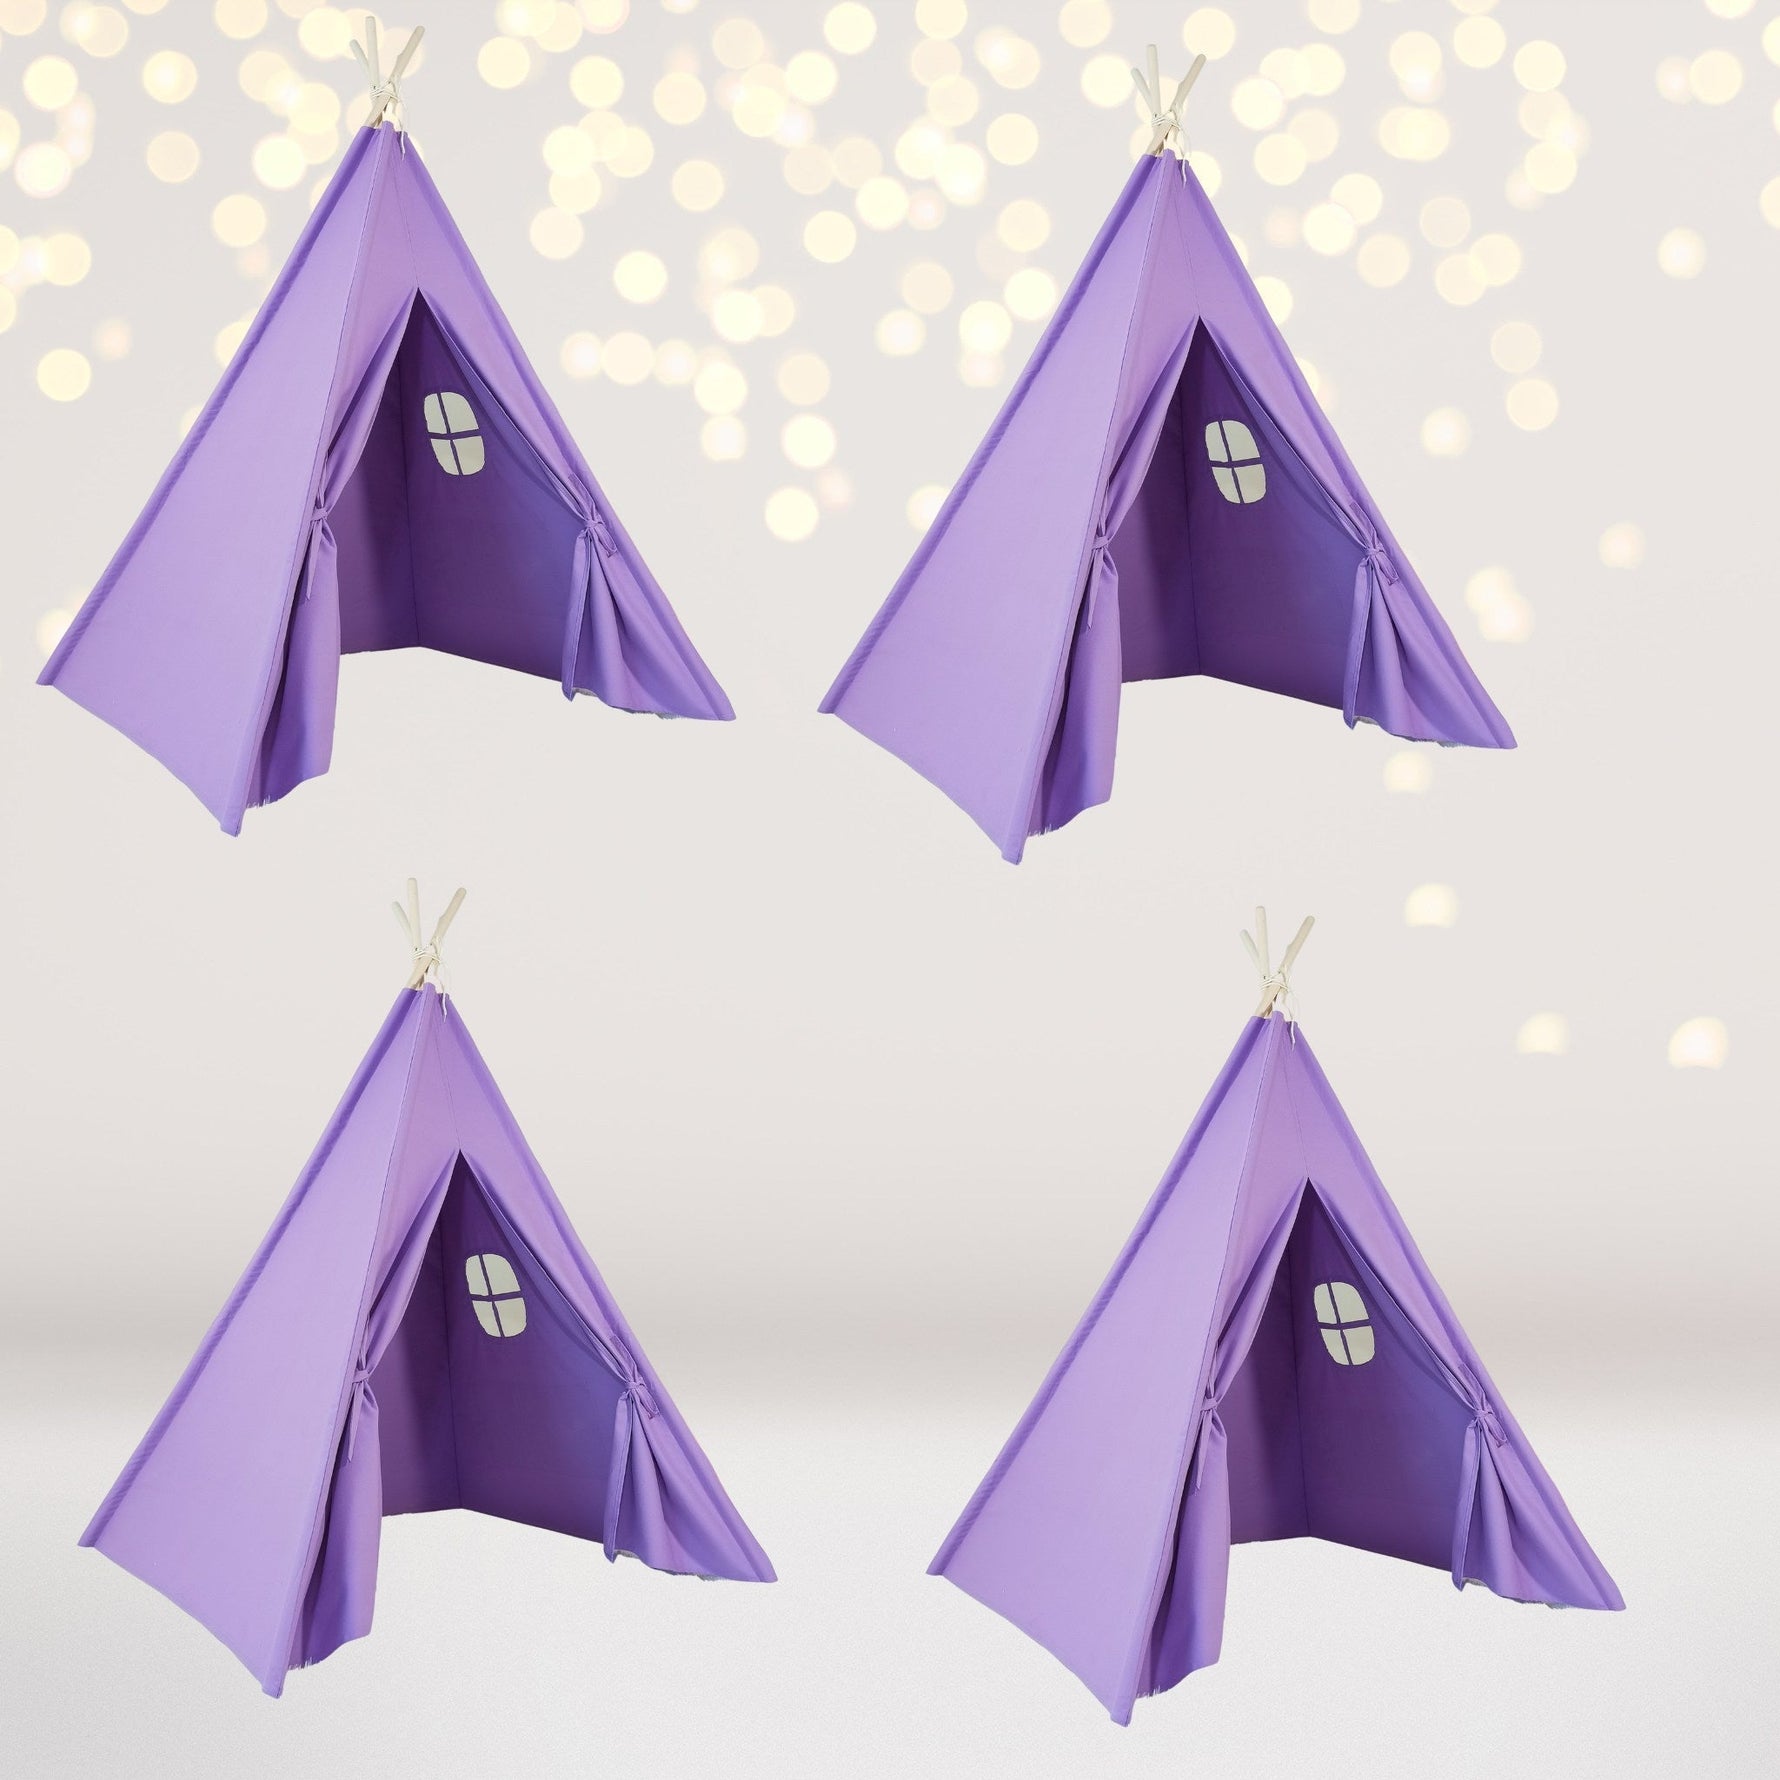 4 pack Kids Sleepover Tents-LUXE Kids Teepee Tent with Lights-Party Pack Lavender